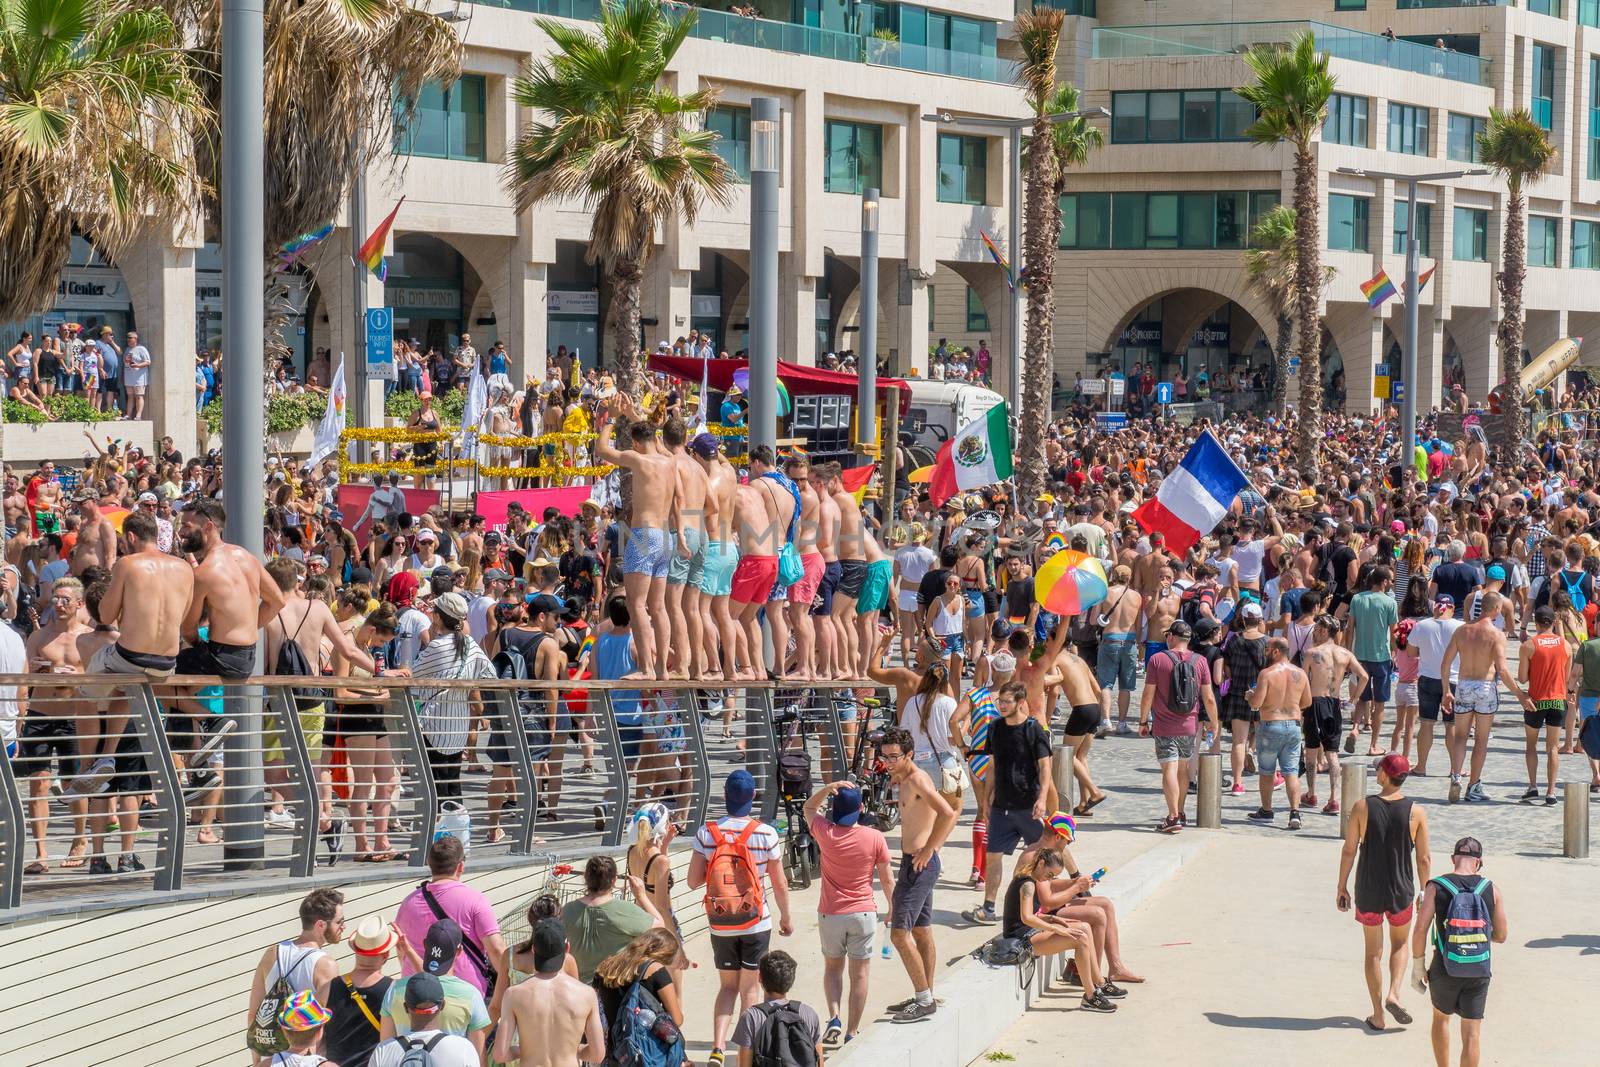 TEL-AVIV, ISRAEL - JUNE 08, 2018: Scene of the annual pride parade of the LGBT community, along the coast, with various participants, in Tel-Aviv, Israel